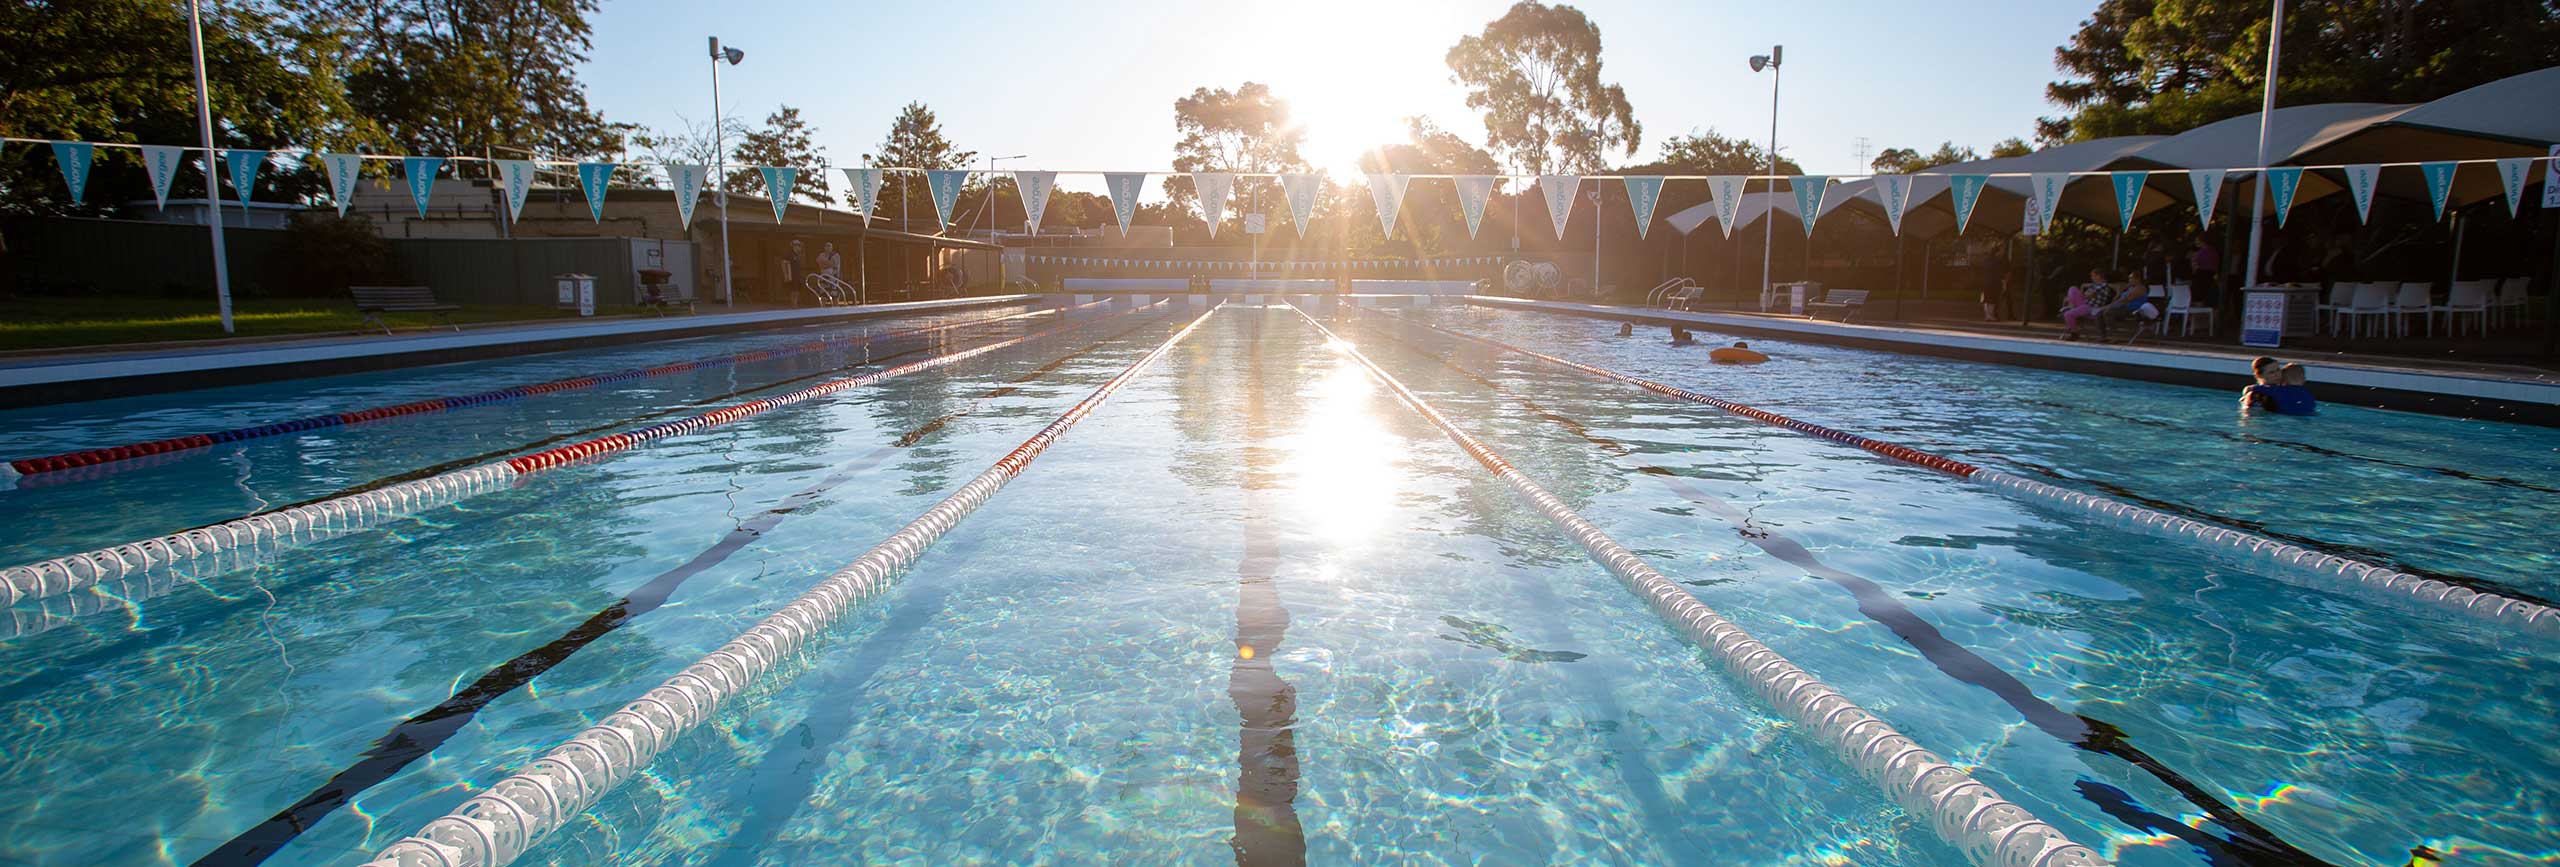 Keen swimmers can make use of the 50m pool at Ripples Penrith all year round.